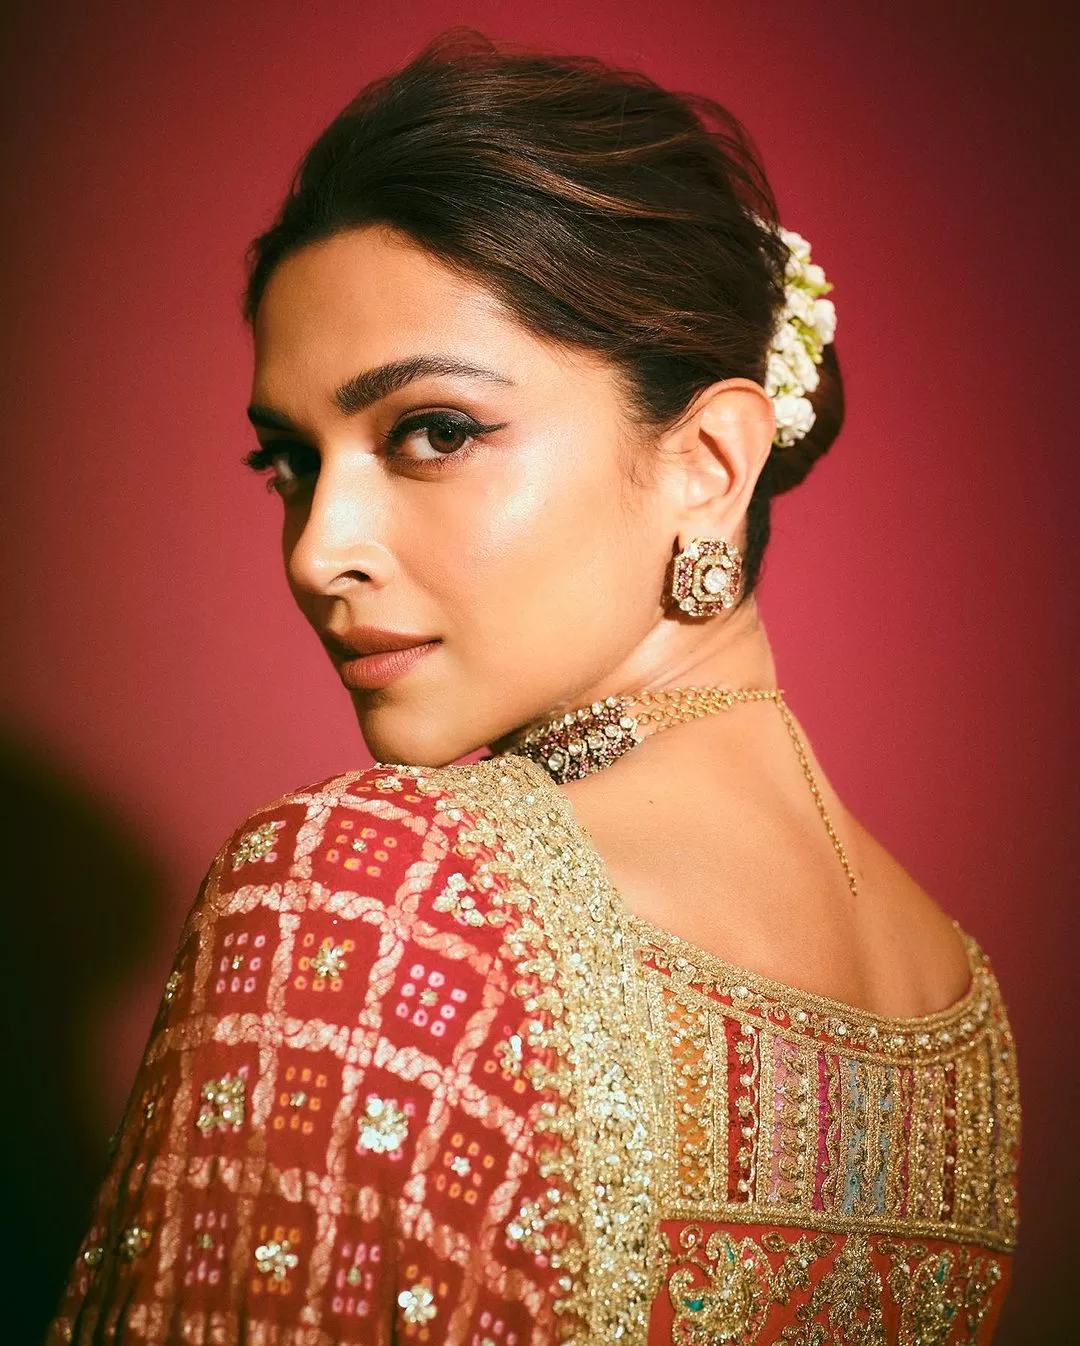 'Women Coming After...' Deepika Padukone's Cryptic Note About Success During Pregnancy